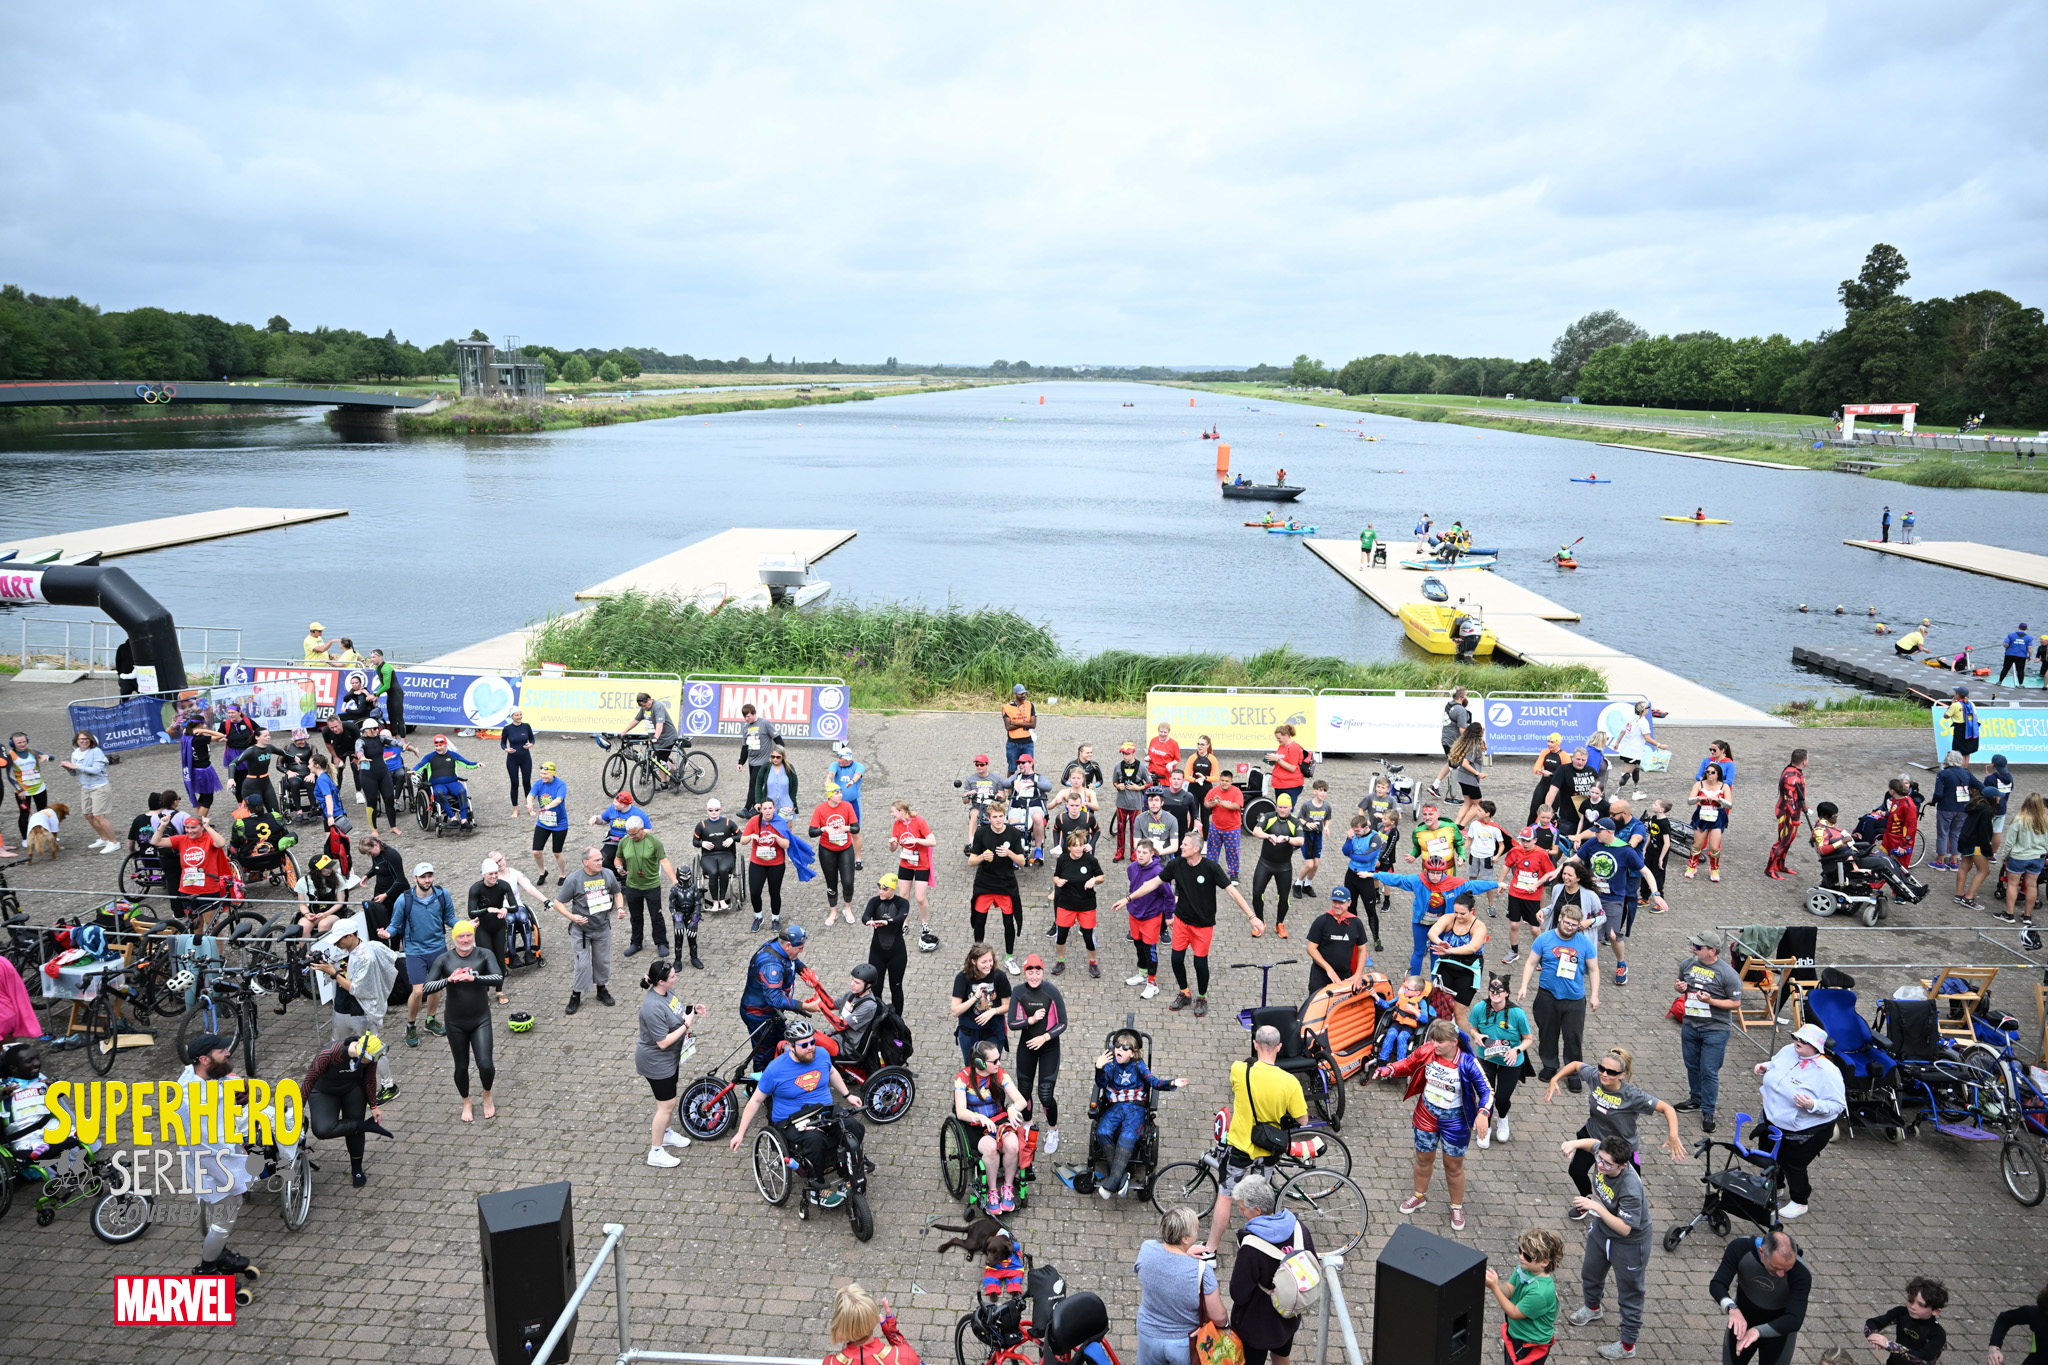 A group of people gather around Dorney Lake waiting for the event to start.